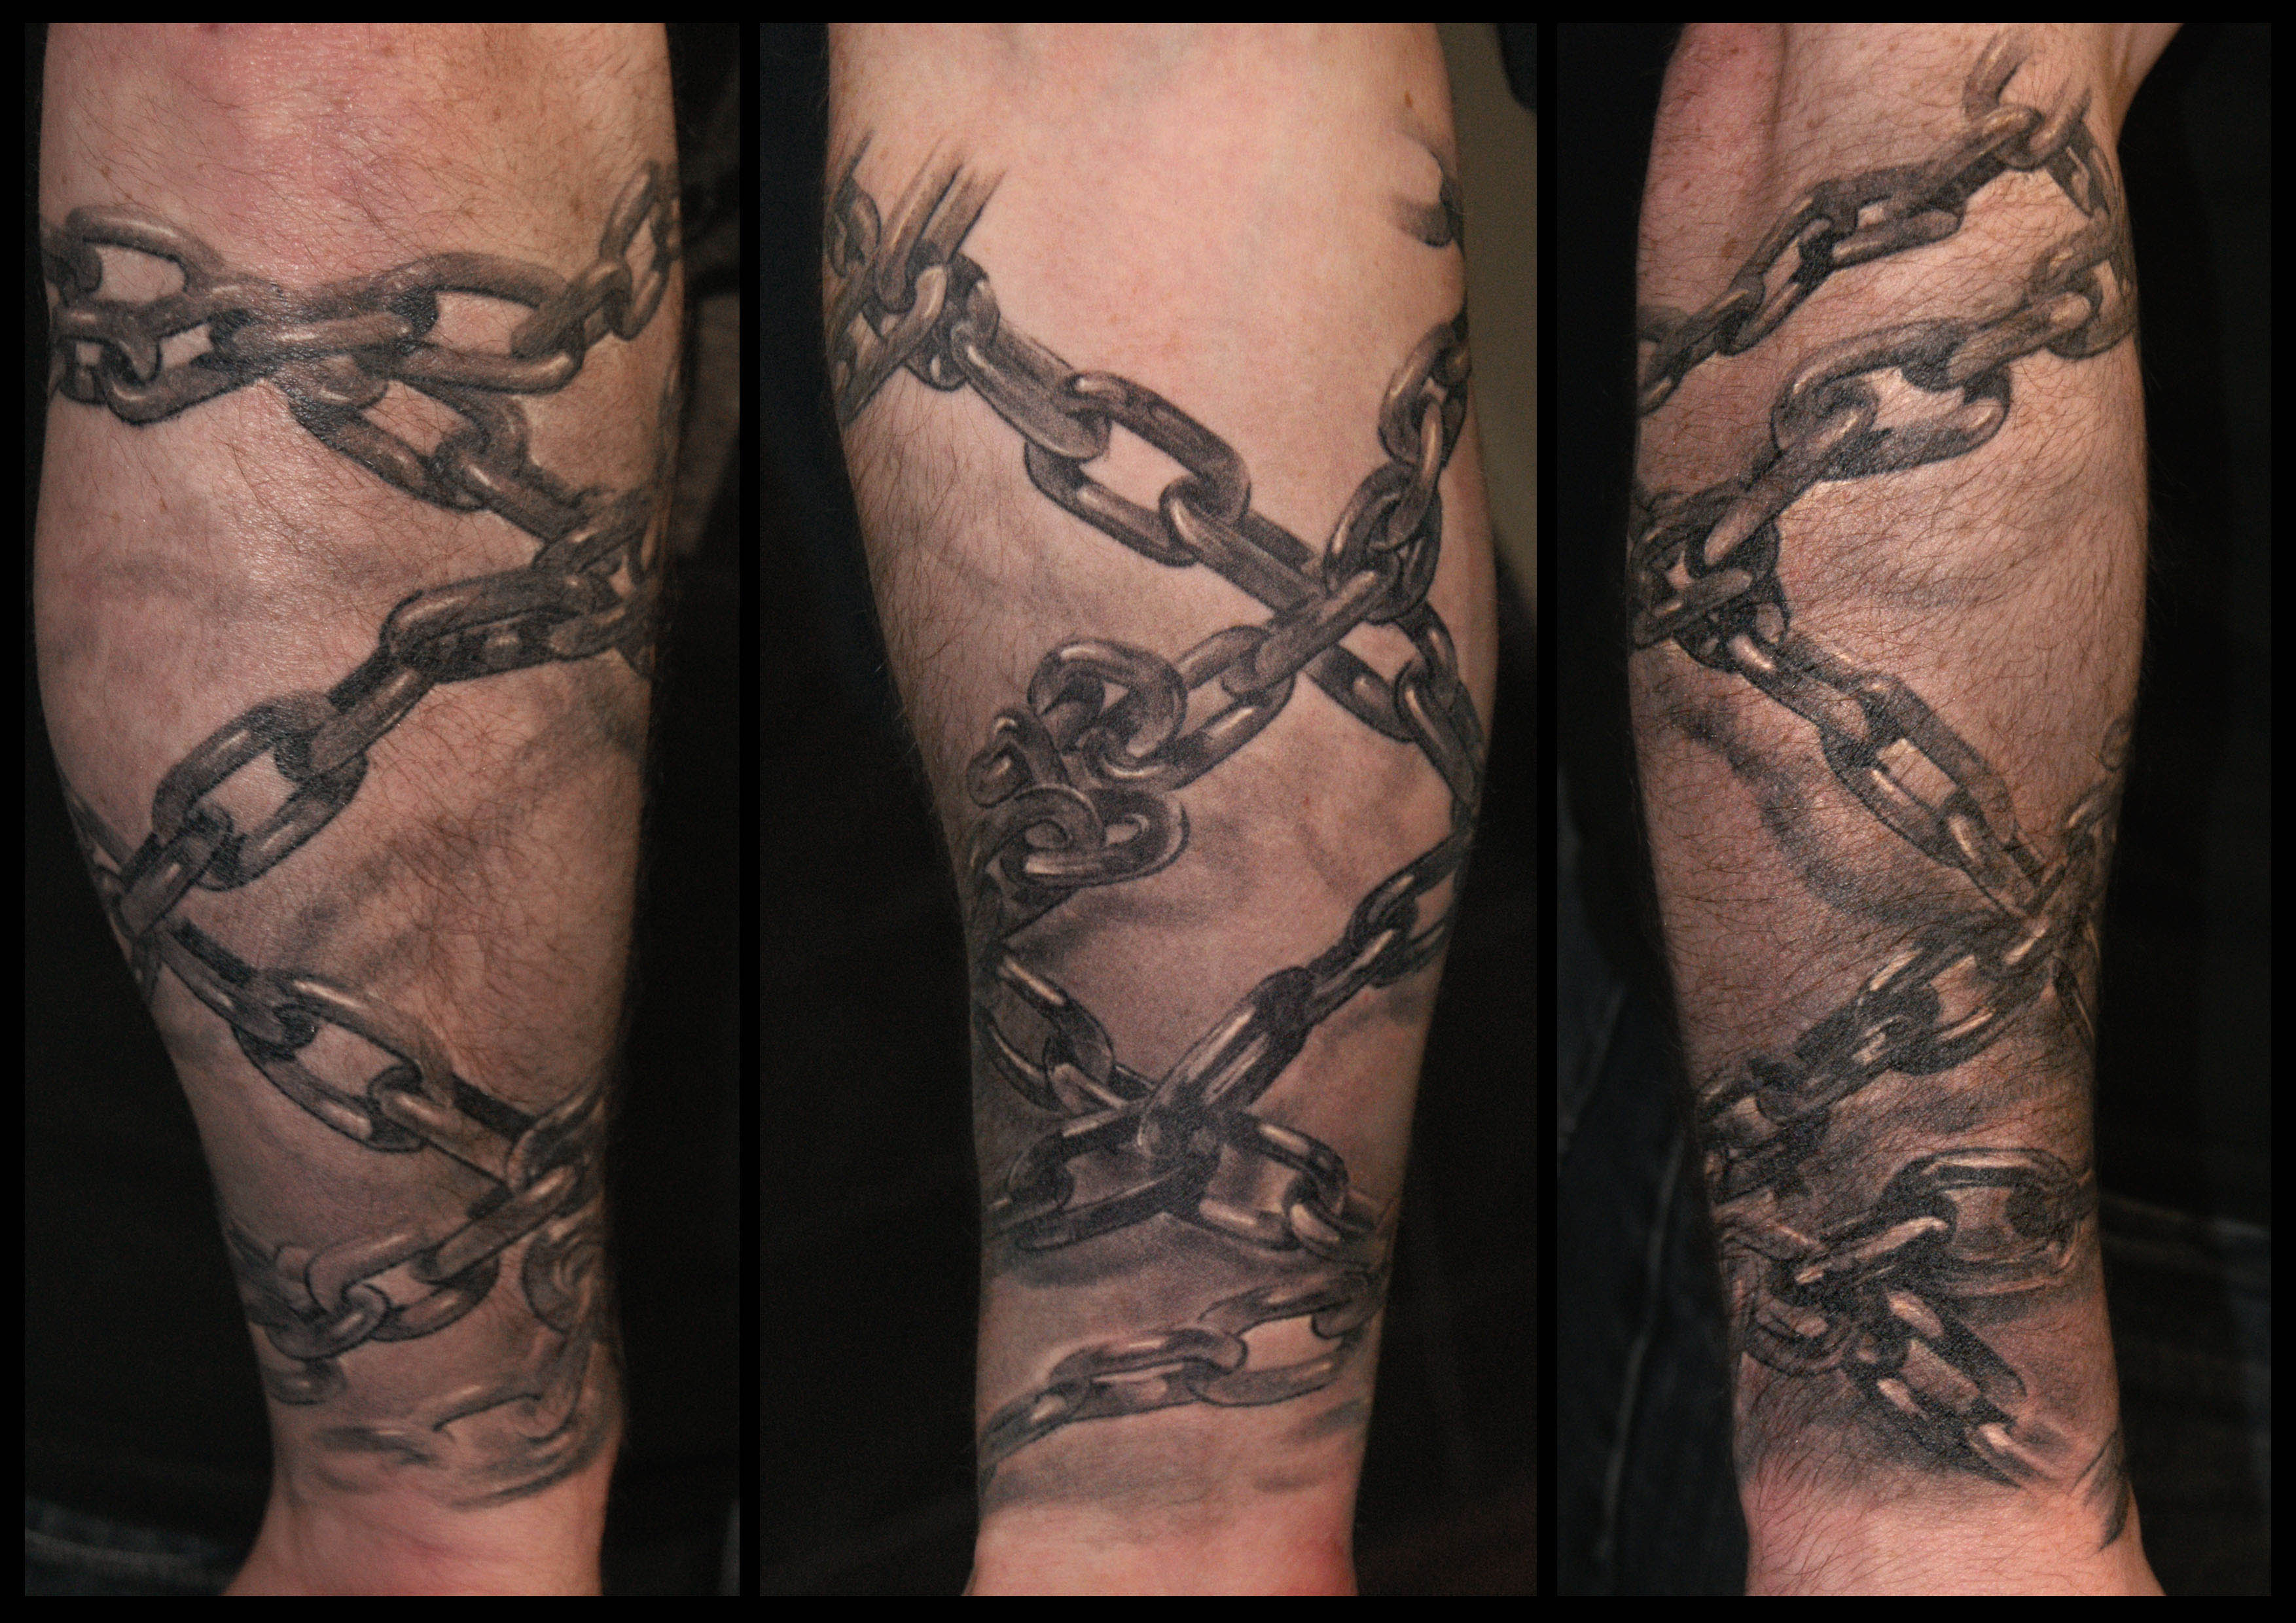 Chain Tattoo Images Designs in dimensions 3508 X 2480